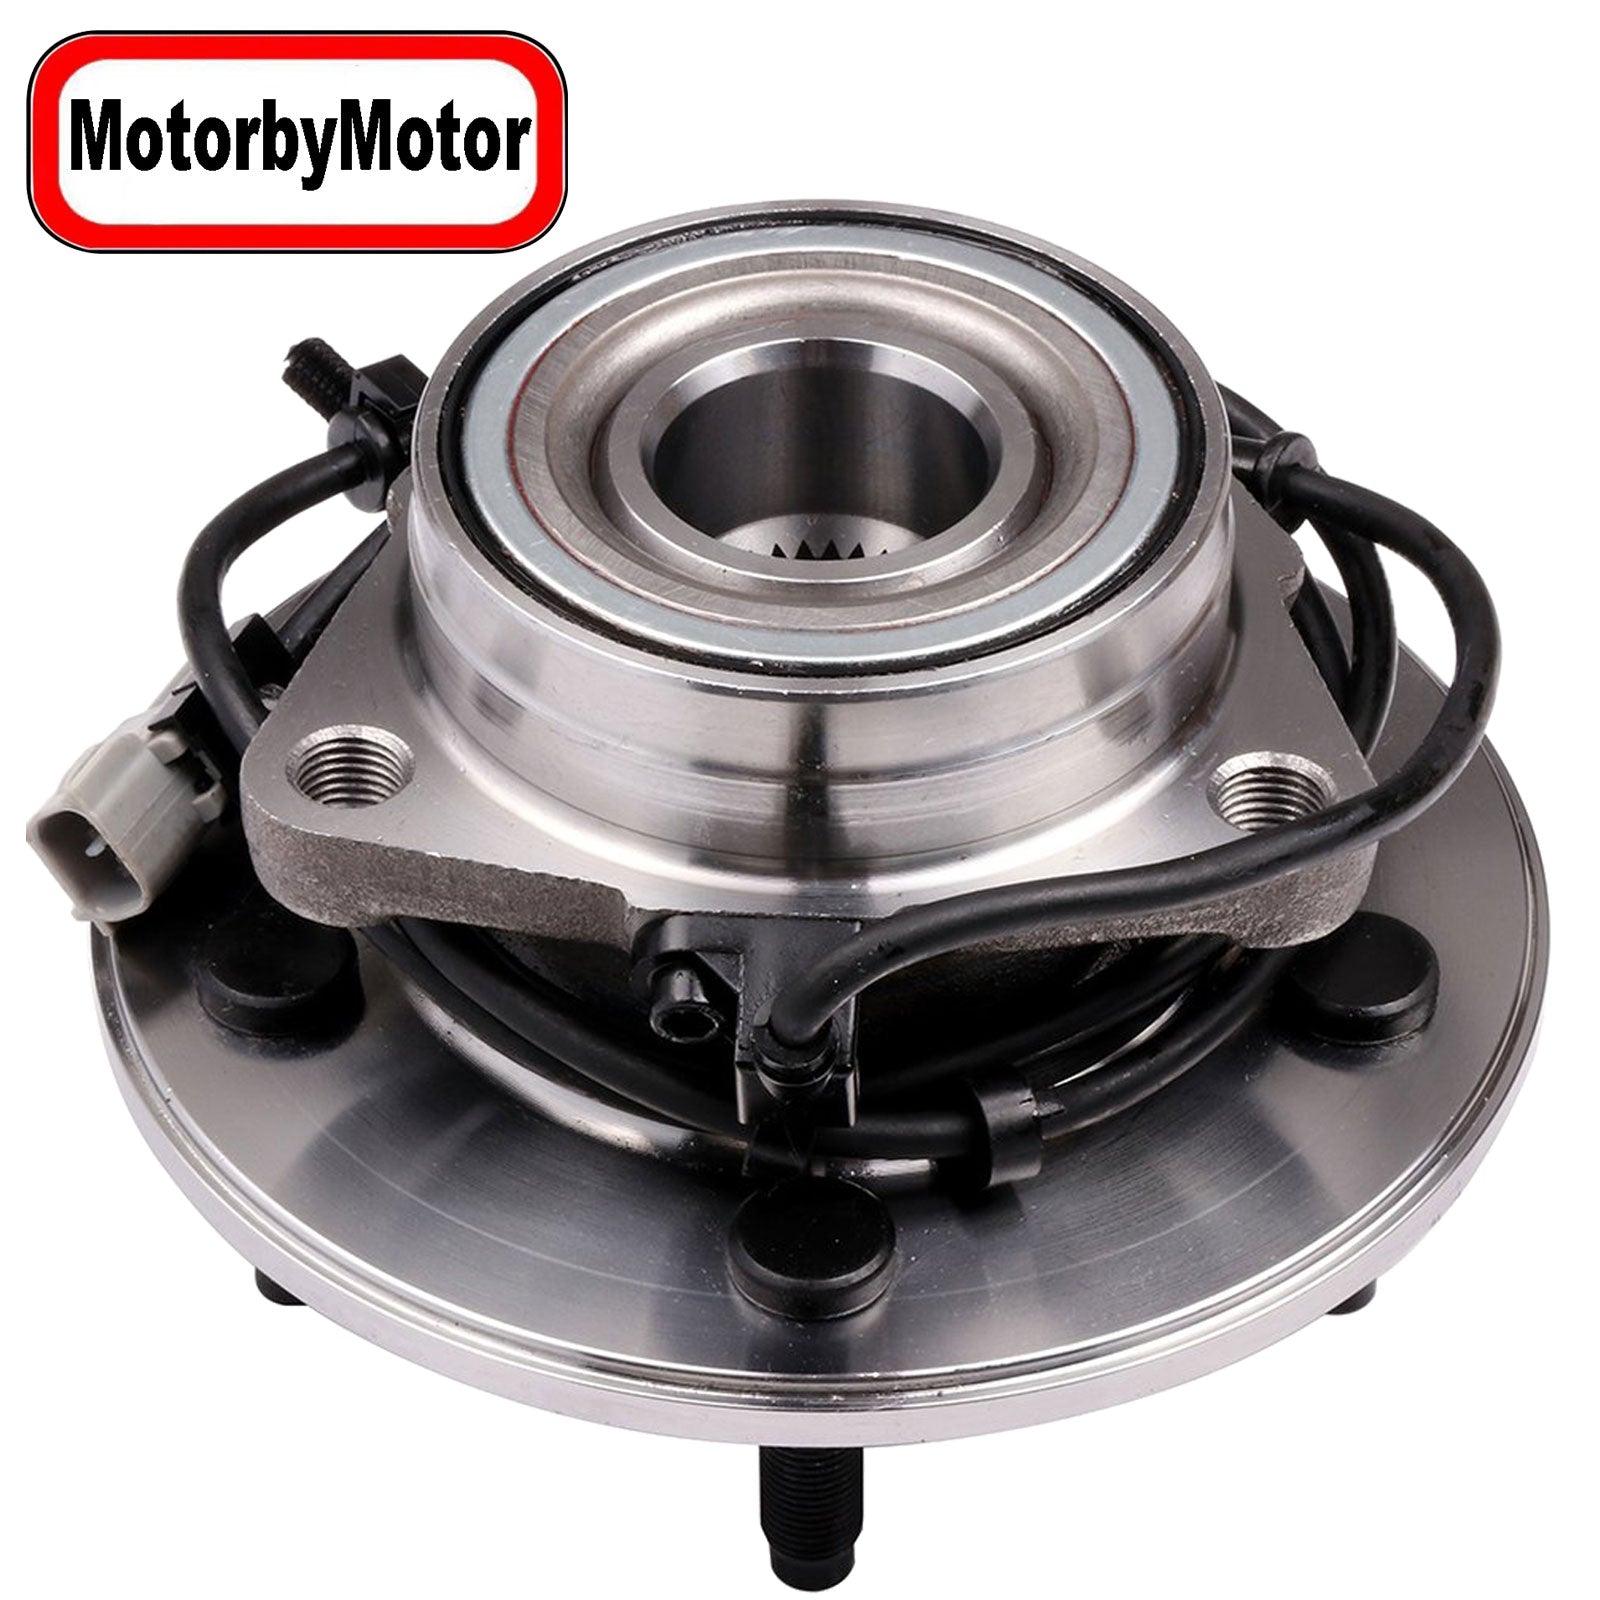 MotorbyMotor 515039 Front Wheel Bearing and Hub Assembly 4WD with 5 Lugs Fits for 2000 2001 Dodge Ram 1500 Pickup Low-Runout OE Directly Replacement Hub Bearing (4x4, w/ABS) MotorbyMotor